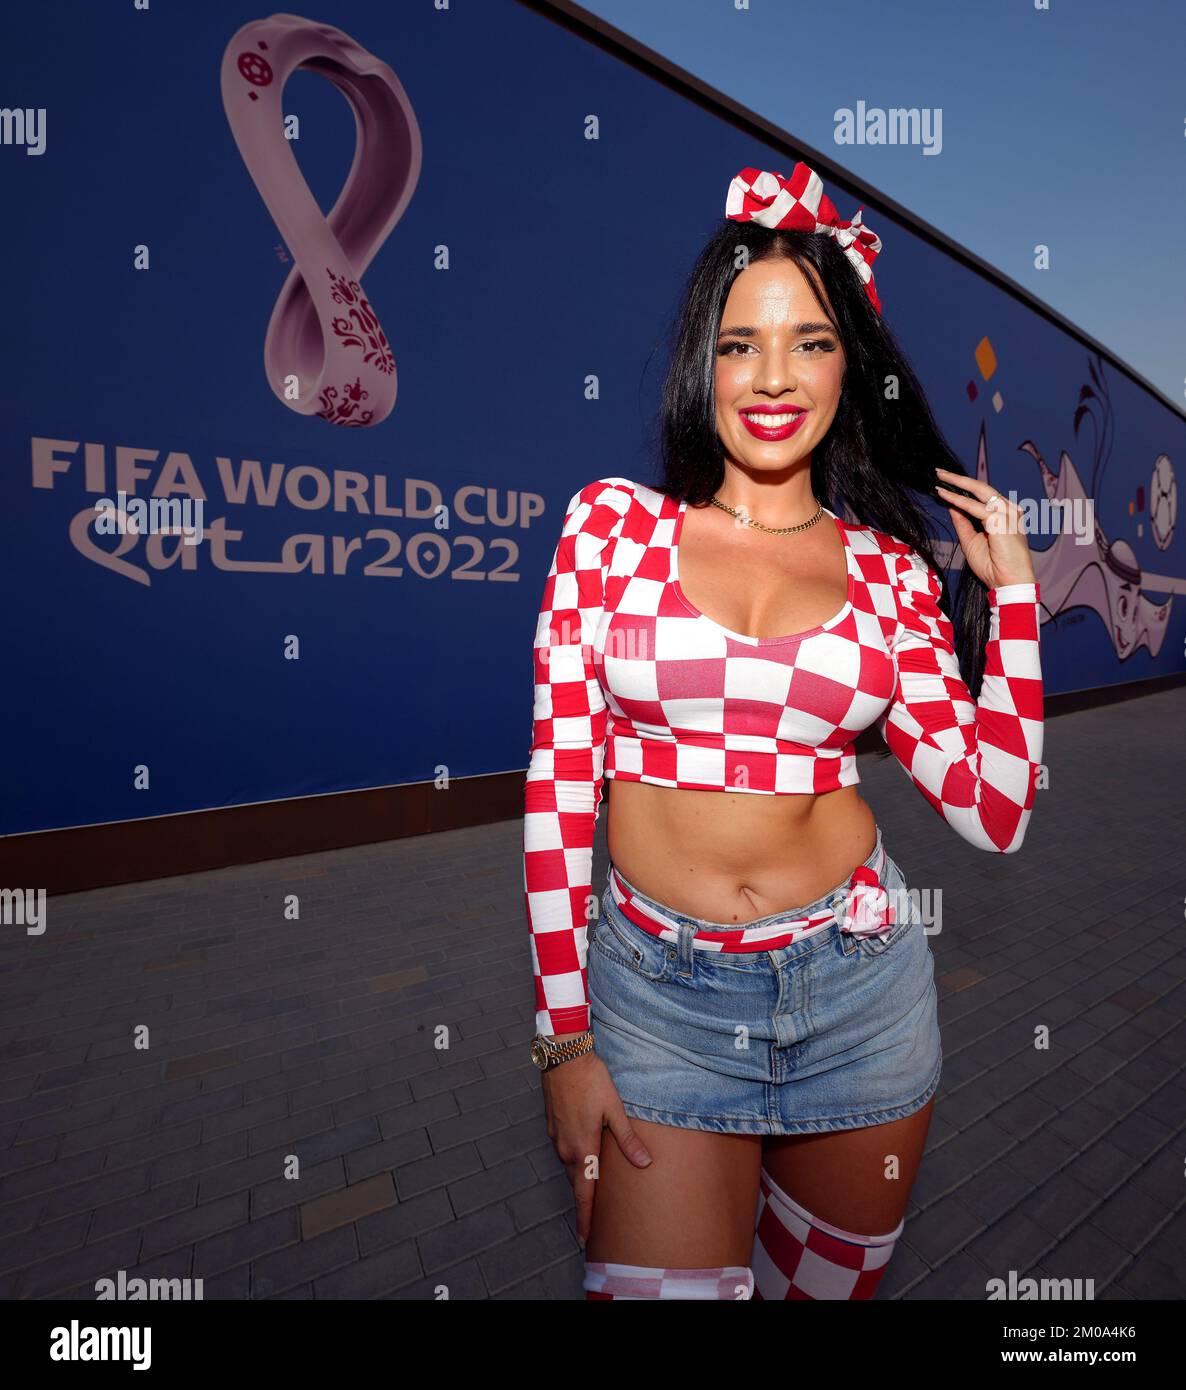 Croatia fan and model Ivana Knoll outside the ground ahead of the FIFA World Cup Round of Sixteen match at the Al Janoub Stadium in Al-Wakrah, Qatar. Picture date: Monday December 5, 2022. Stock Photo